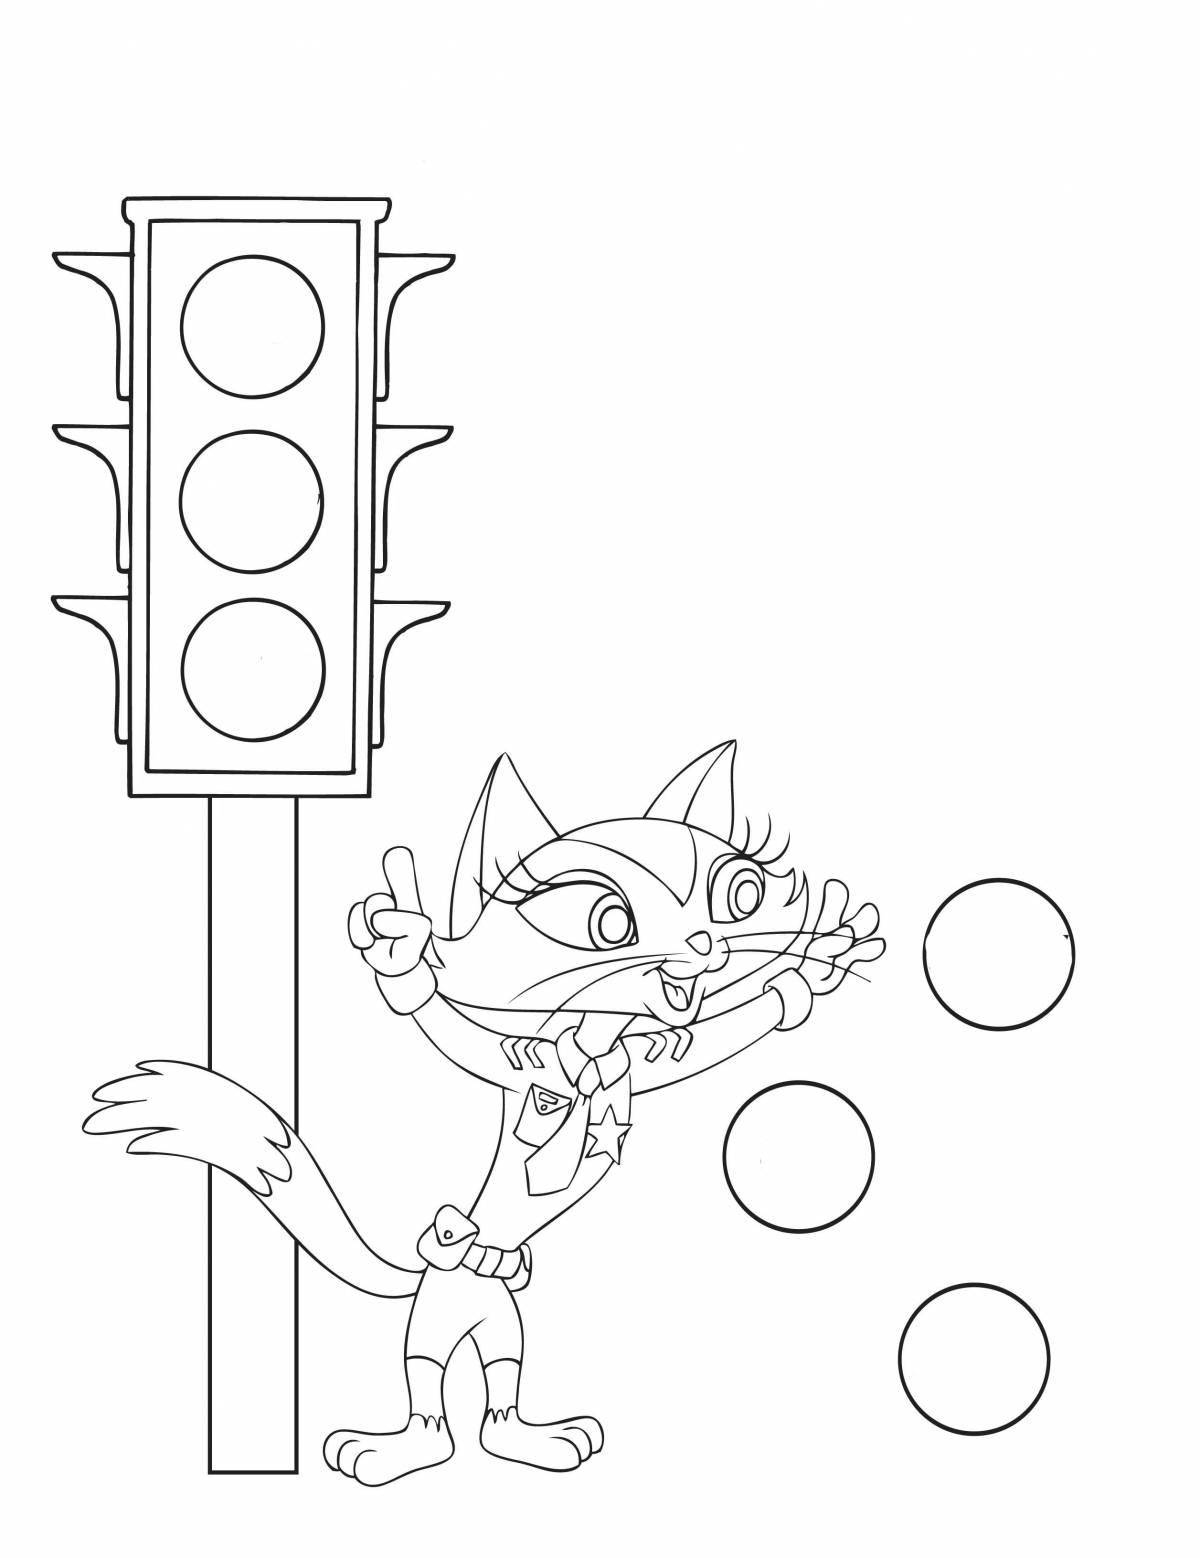 Vibrant traffic light coloring page for kids